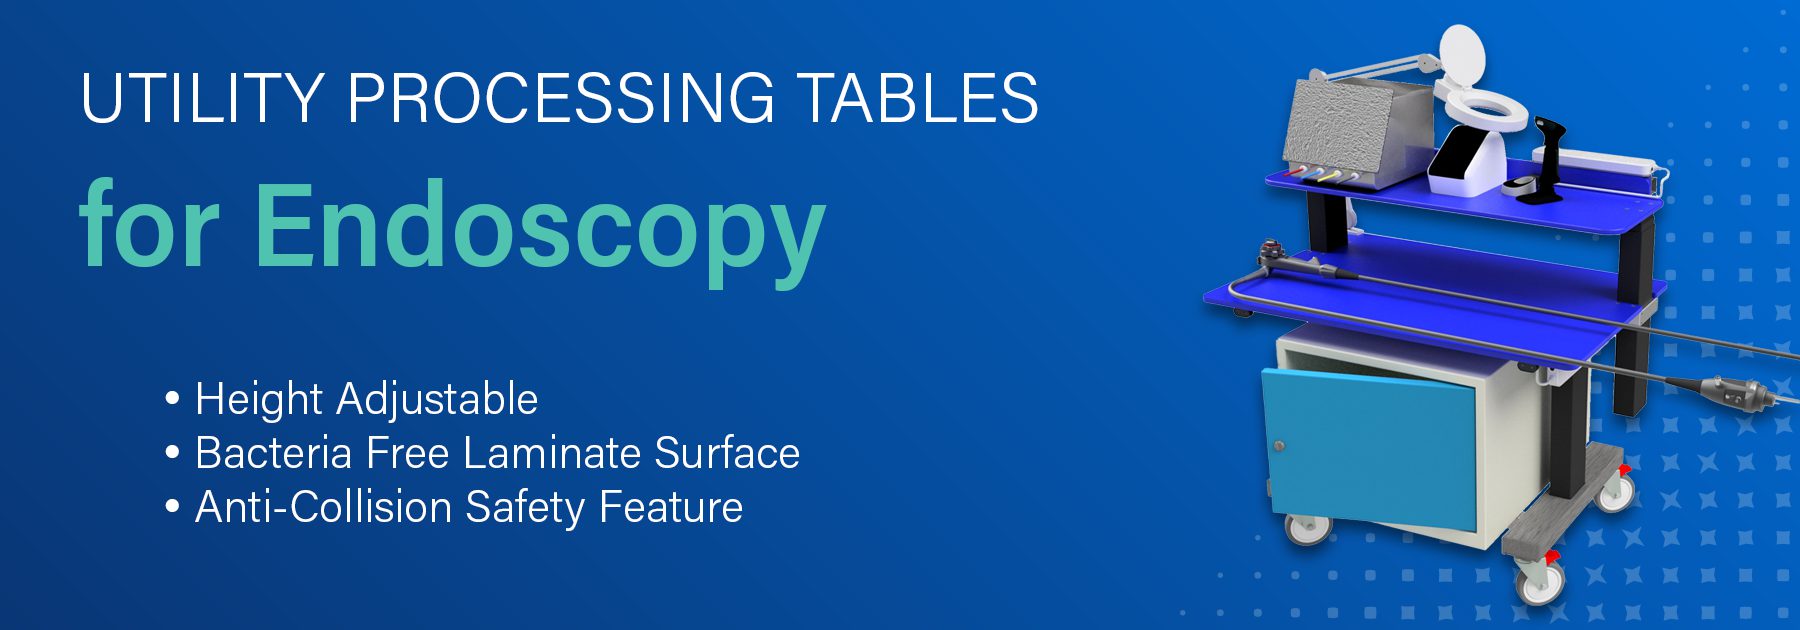 Utility Processing Tables